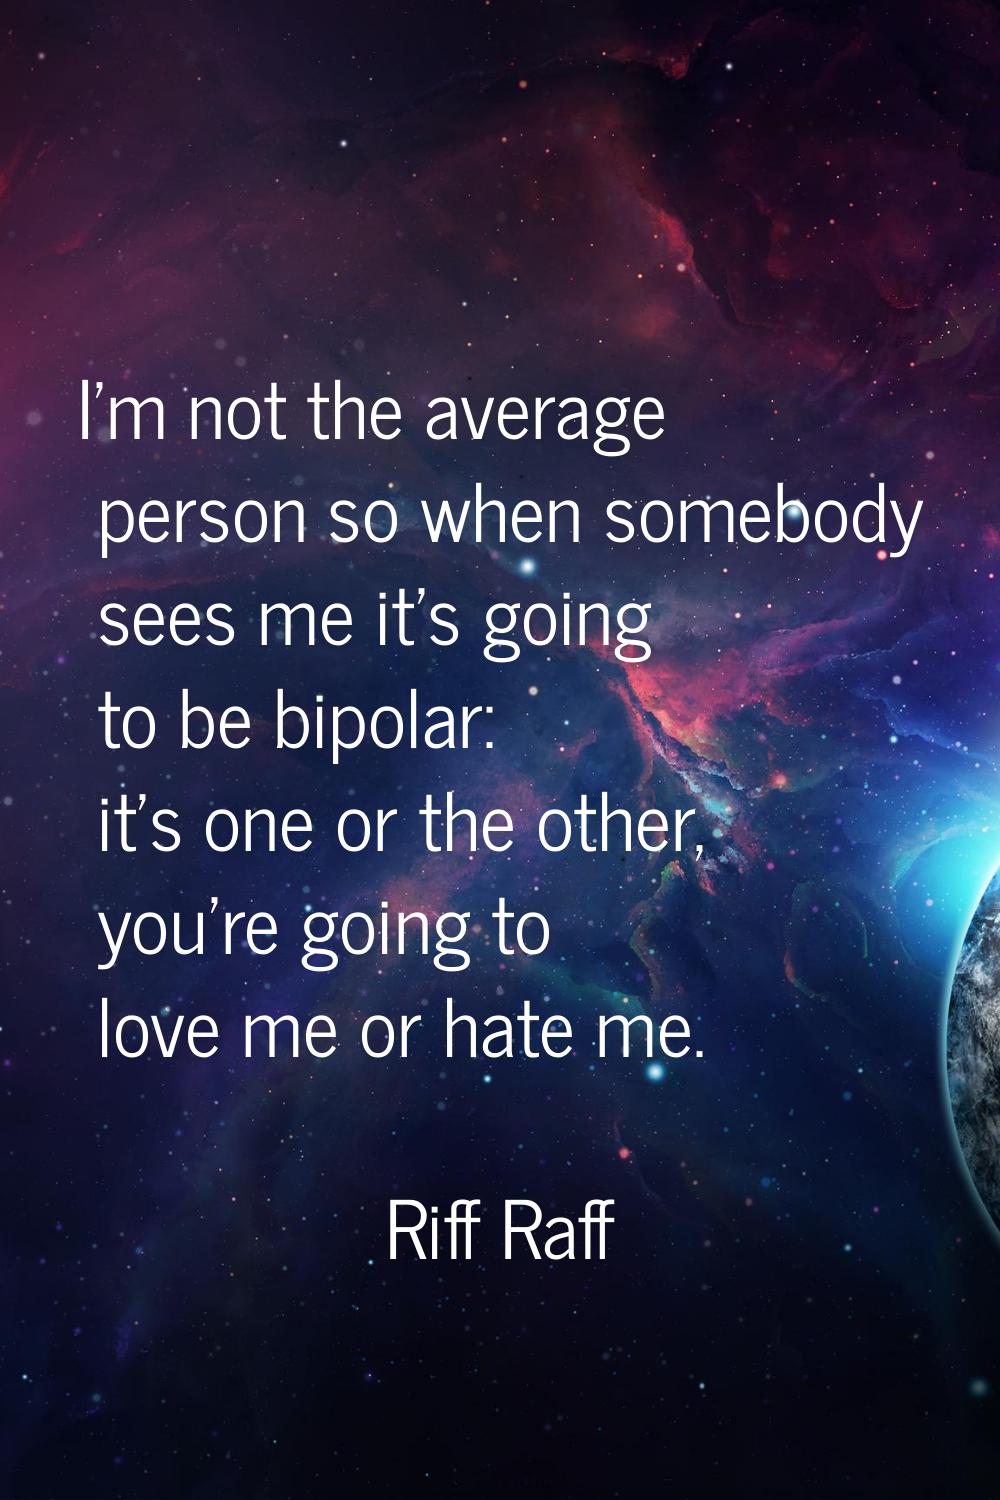 I'm not the average person so when somebody sees me it's going to be bipolar: it's one or the other